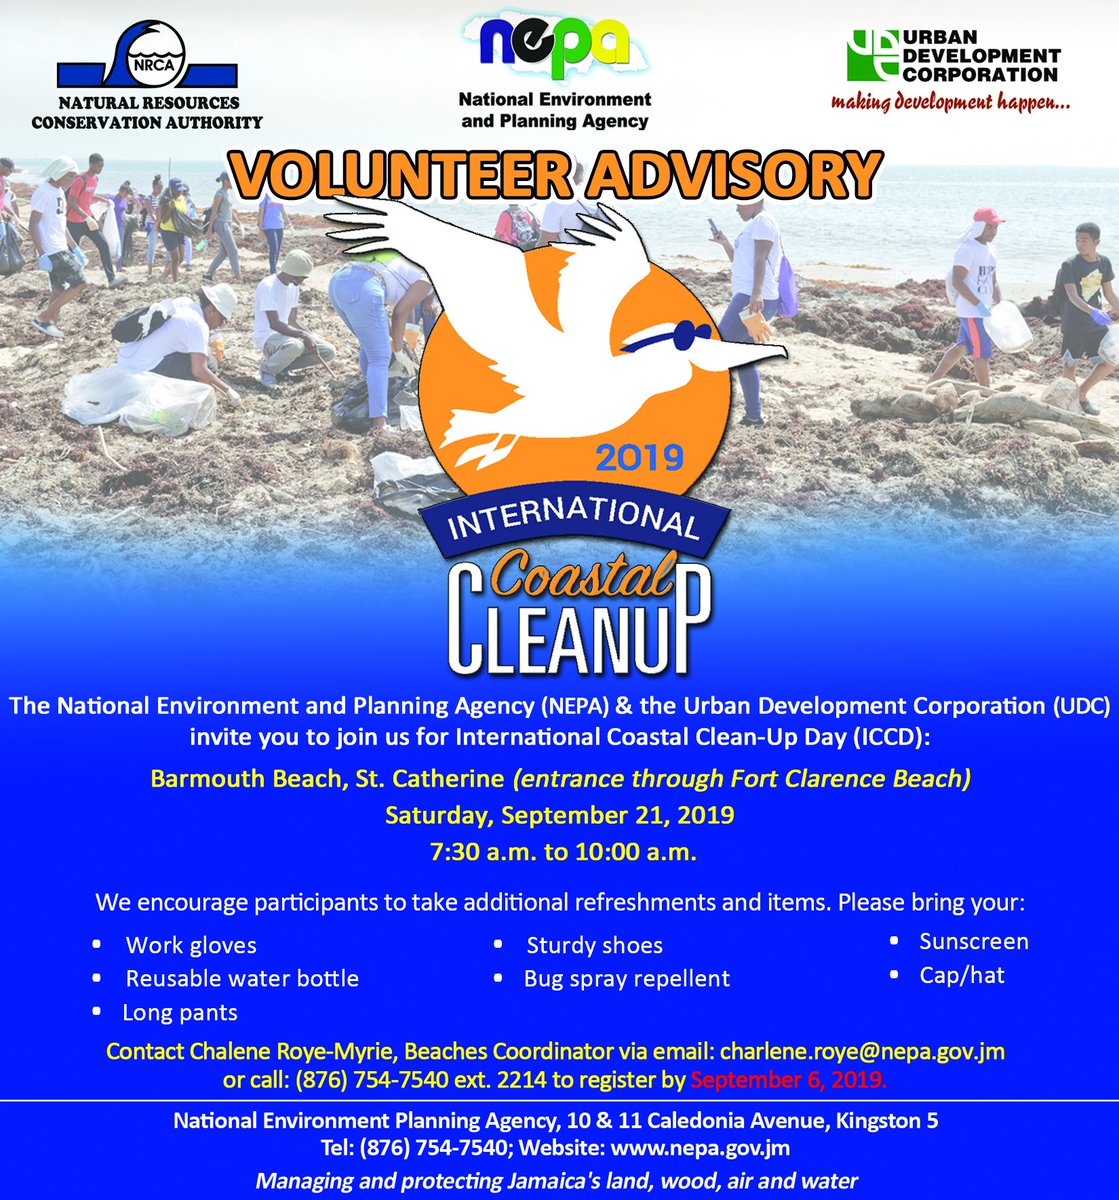 Calling all volunteers for International Coastal Cleanup Day 2019 at Barmouth Beach in St. Catherine!
See the advisory to learn how to sign up!
#ICCD2019 #PreserveEnvironment #NEPAAndYou #BeachCleanUpJa